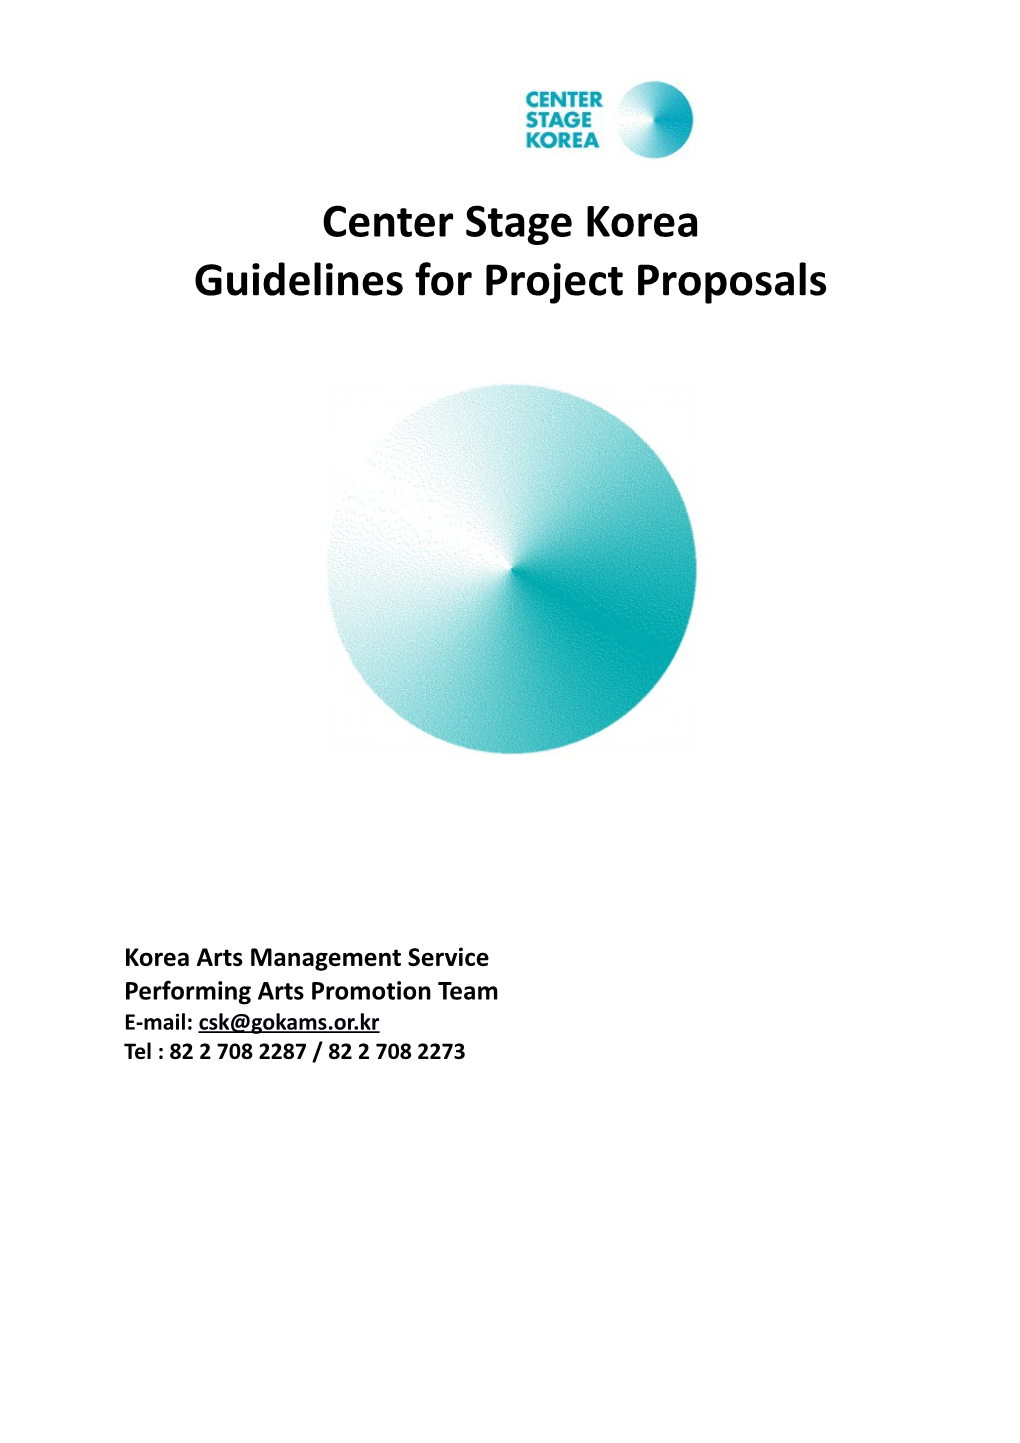 Guidelines for Project Proposals